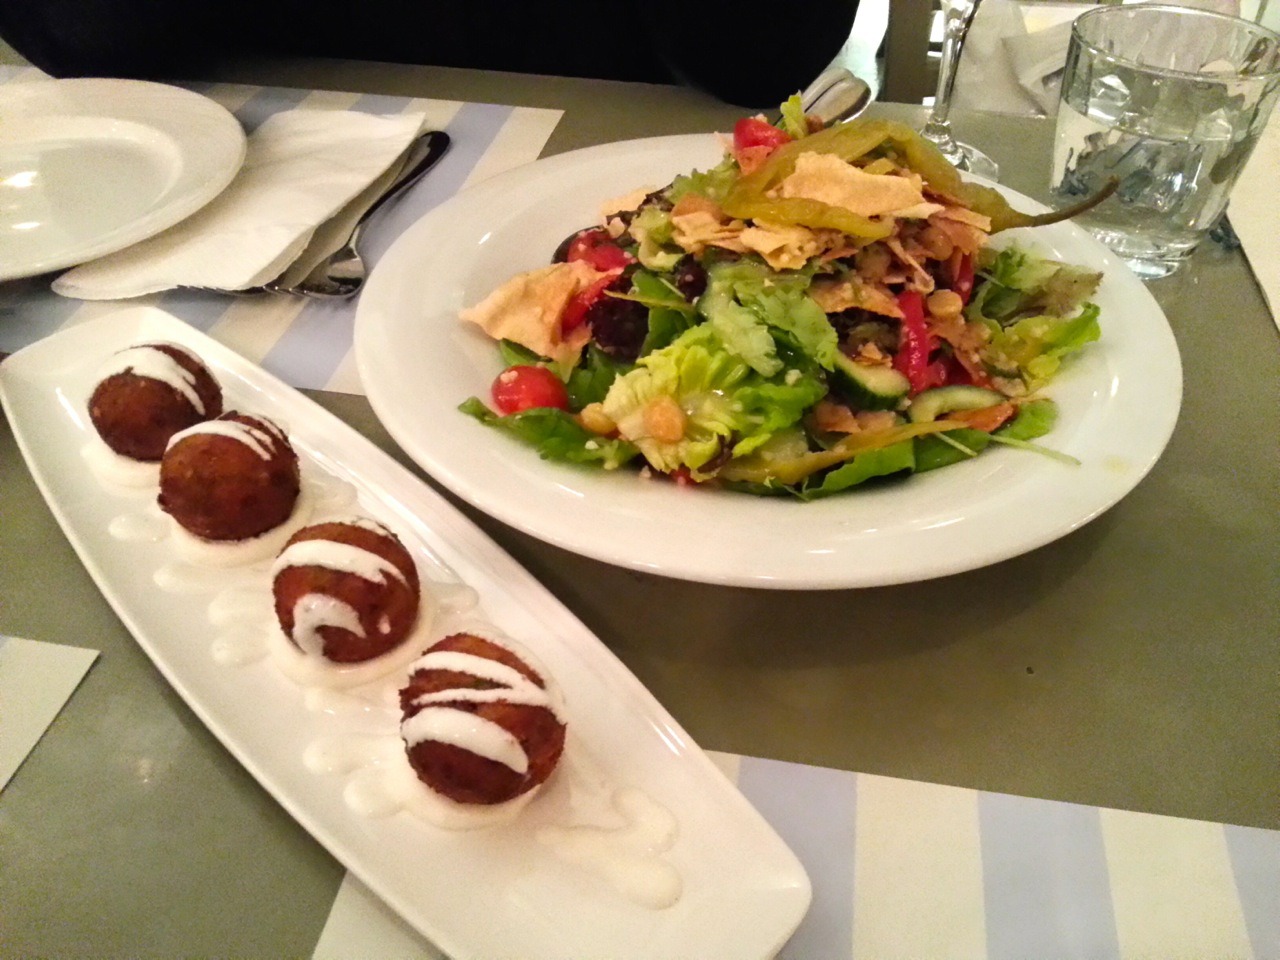 Things to do in Athens for Foodies: Kuzina Restaurant Zucchini Balls and Fatoush Salad